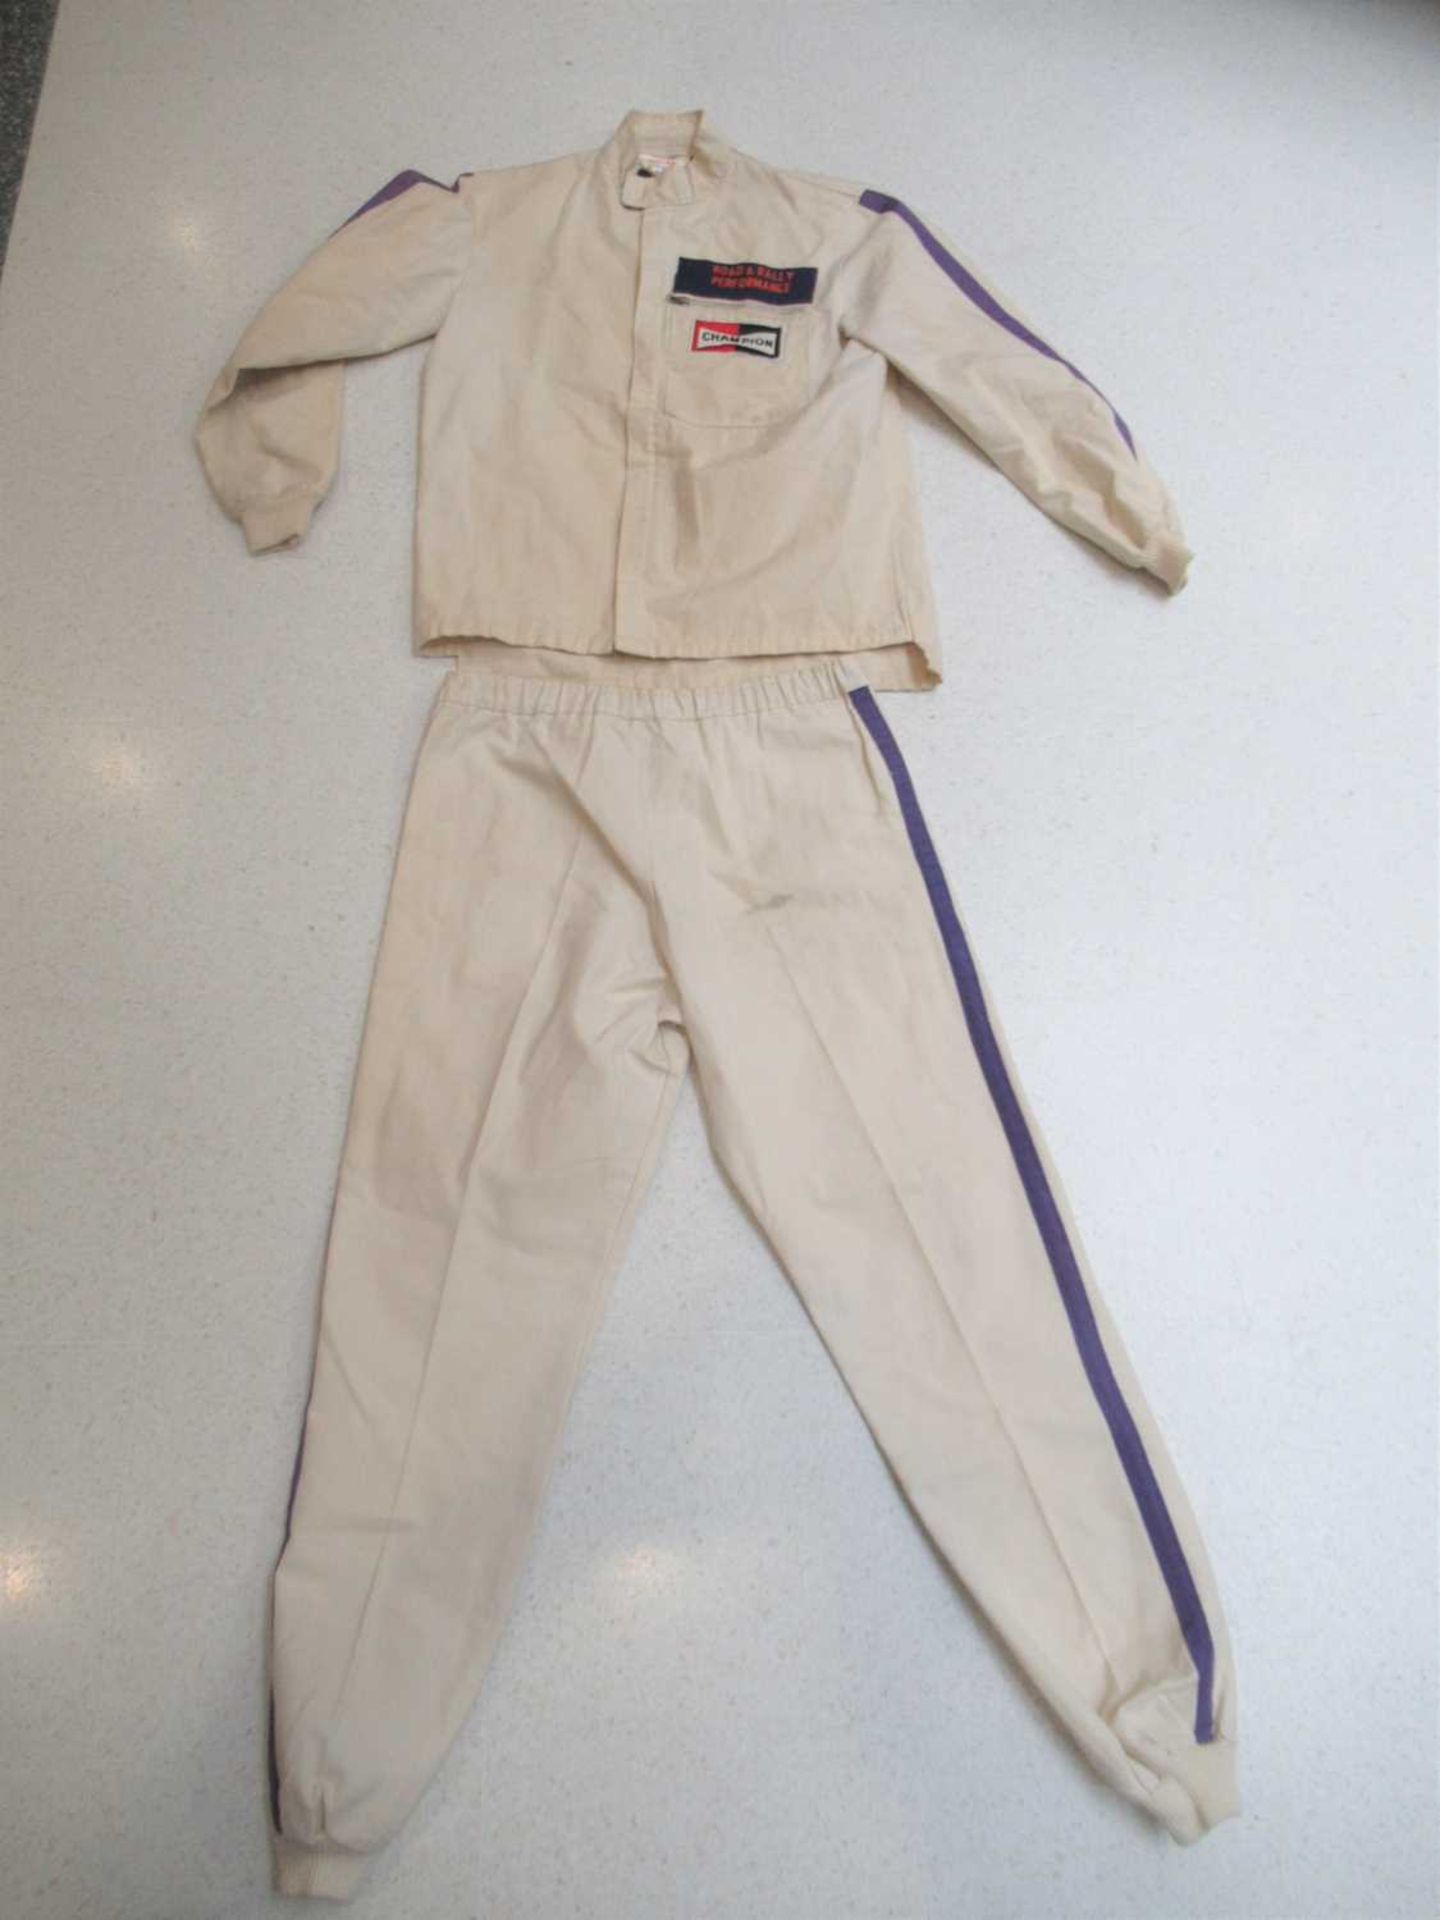 A Nomex Blue and Red Car Racing Suit, 40 inch chest size, and a Nomex Two Piece Green and Purple - Image 3 of 5